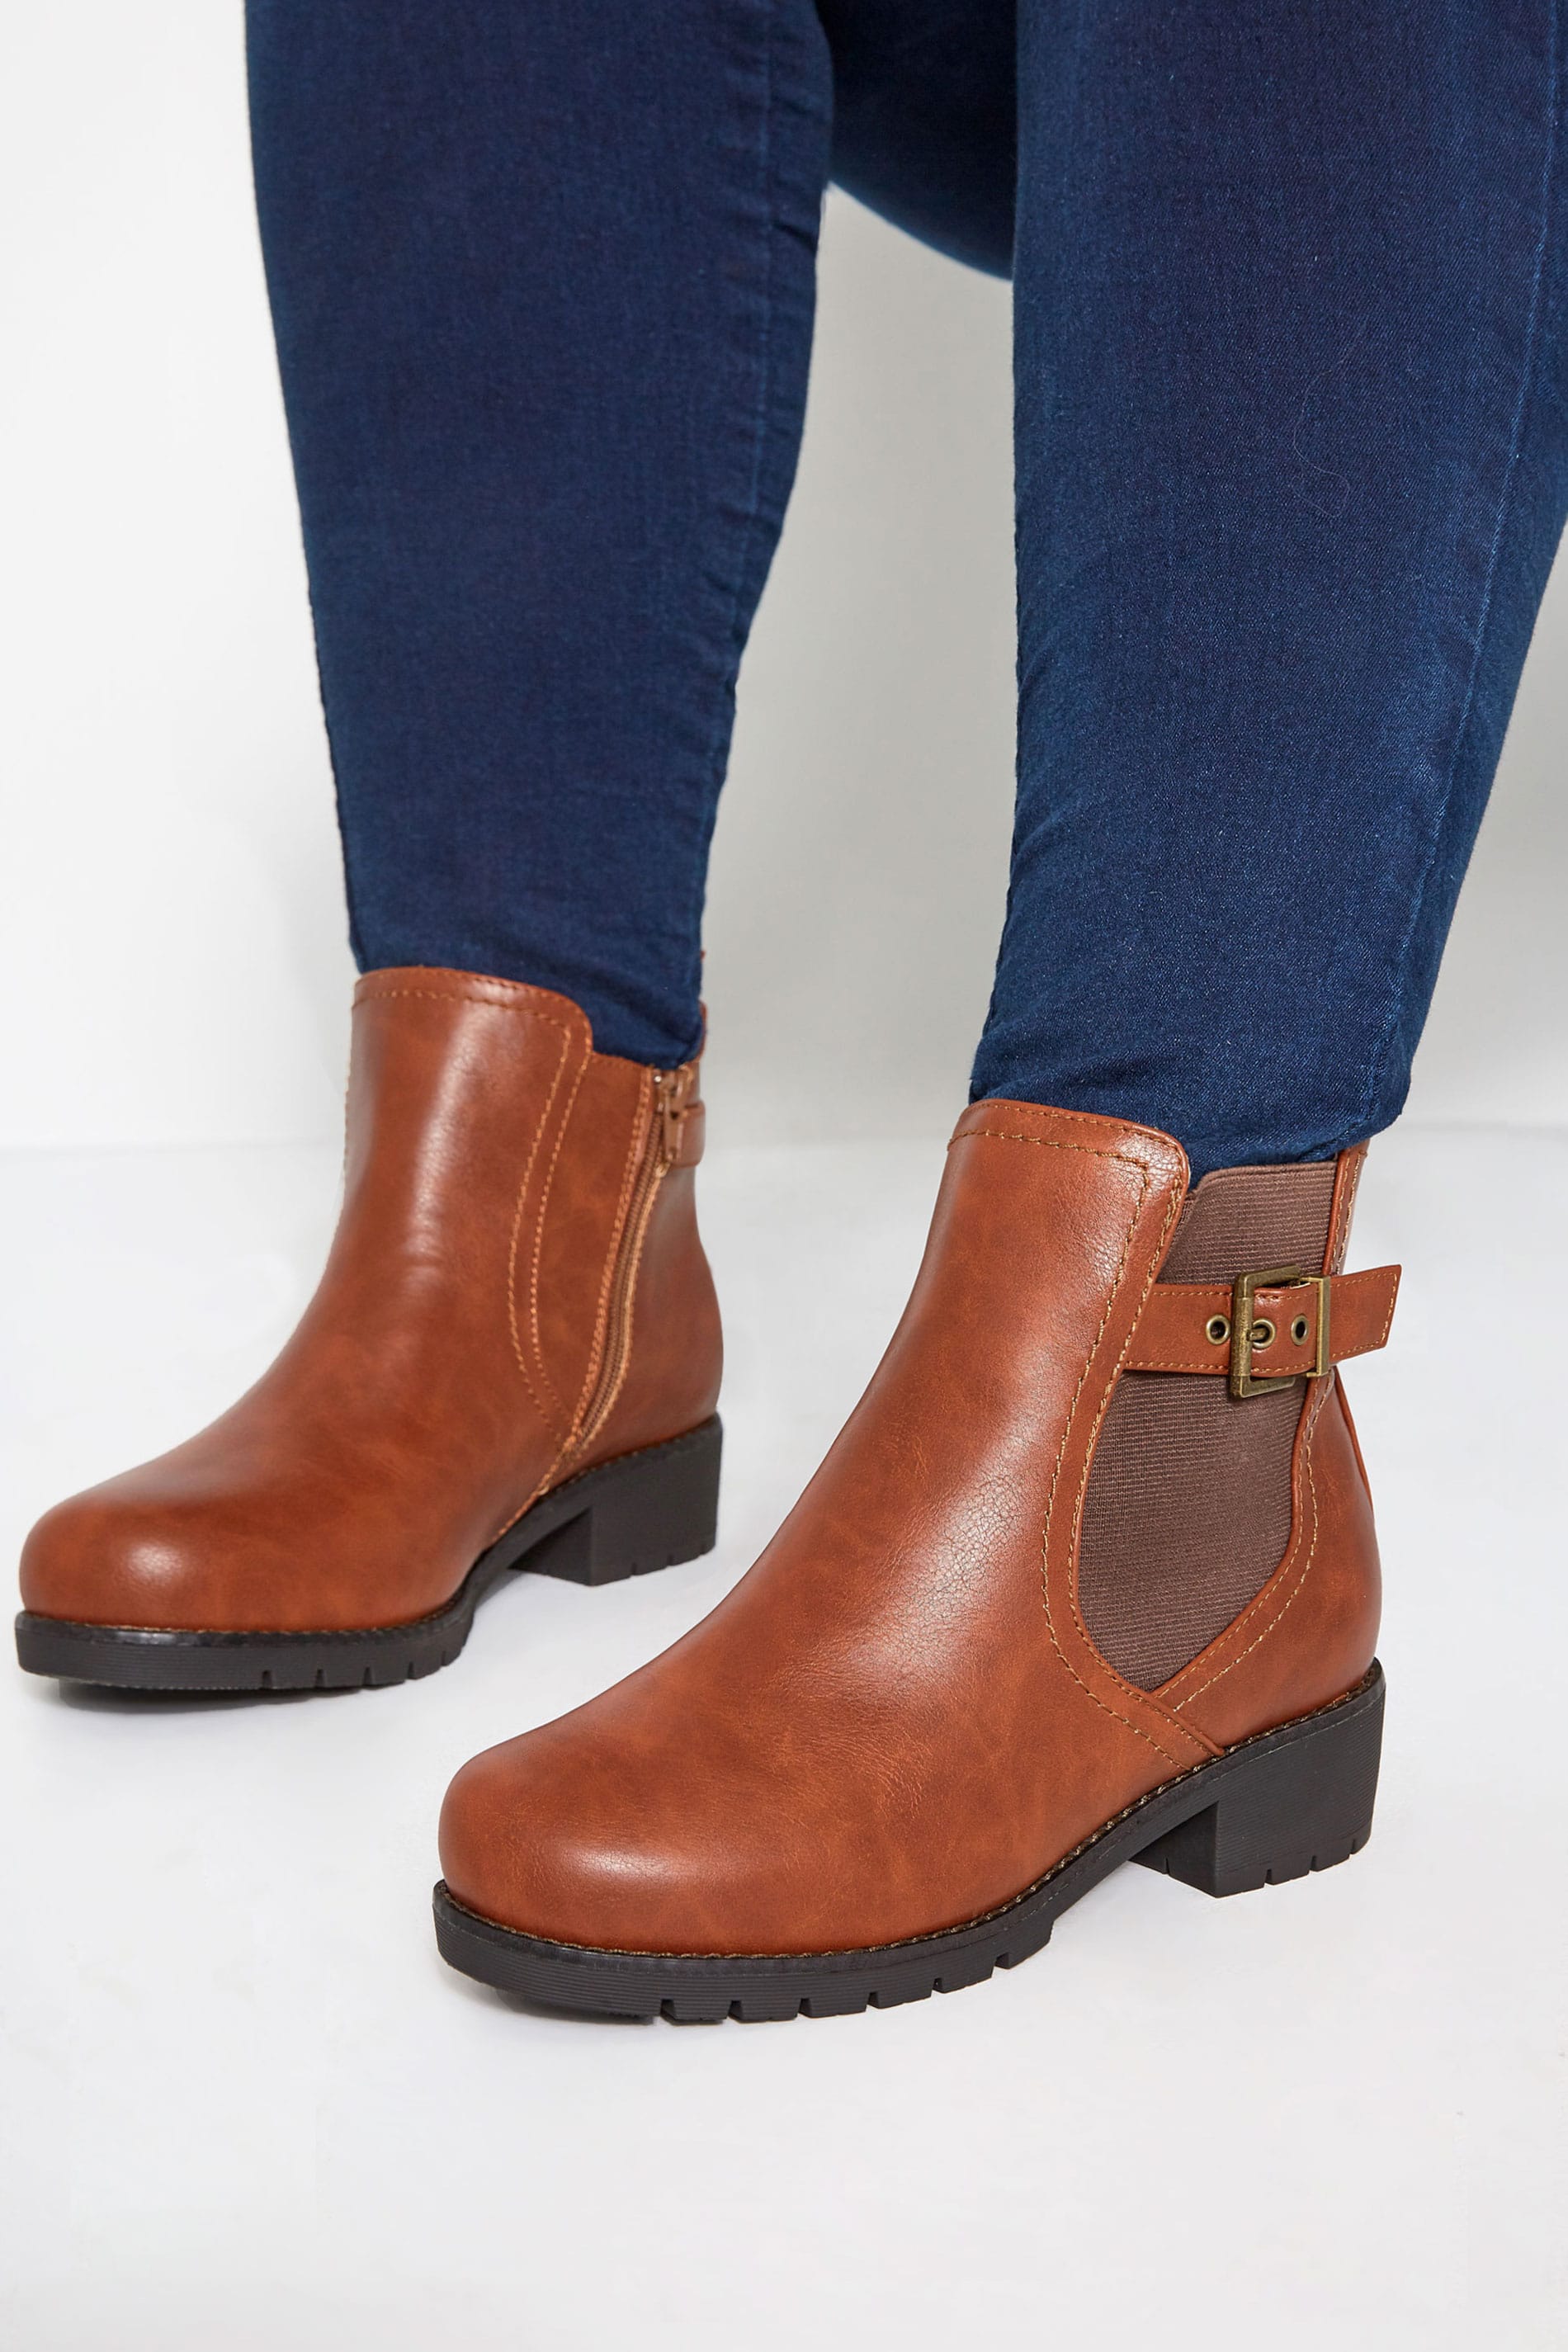 Tan Chelsea Buckle Ankle Boots In EEE Fit 154268 2a4a 